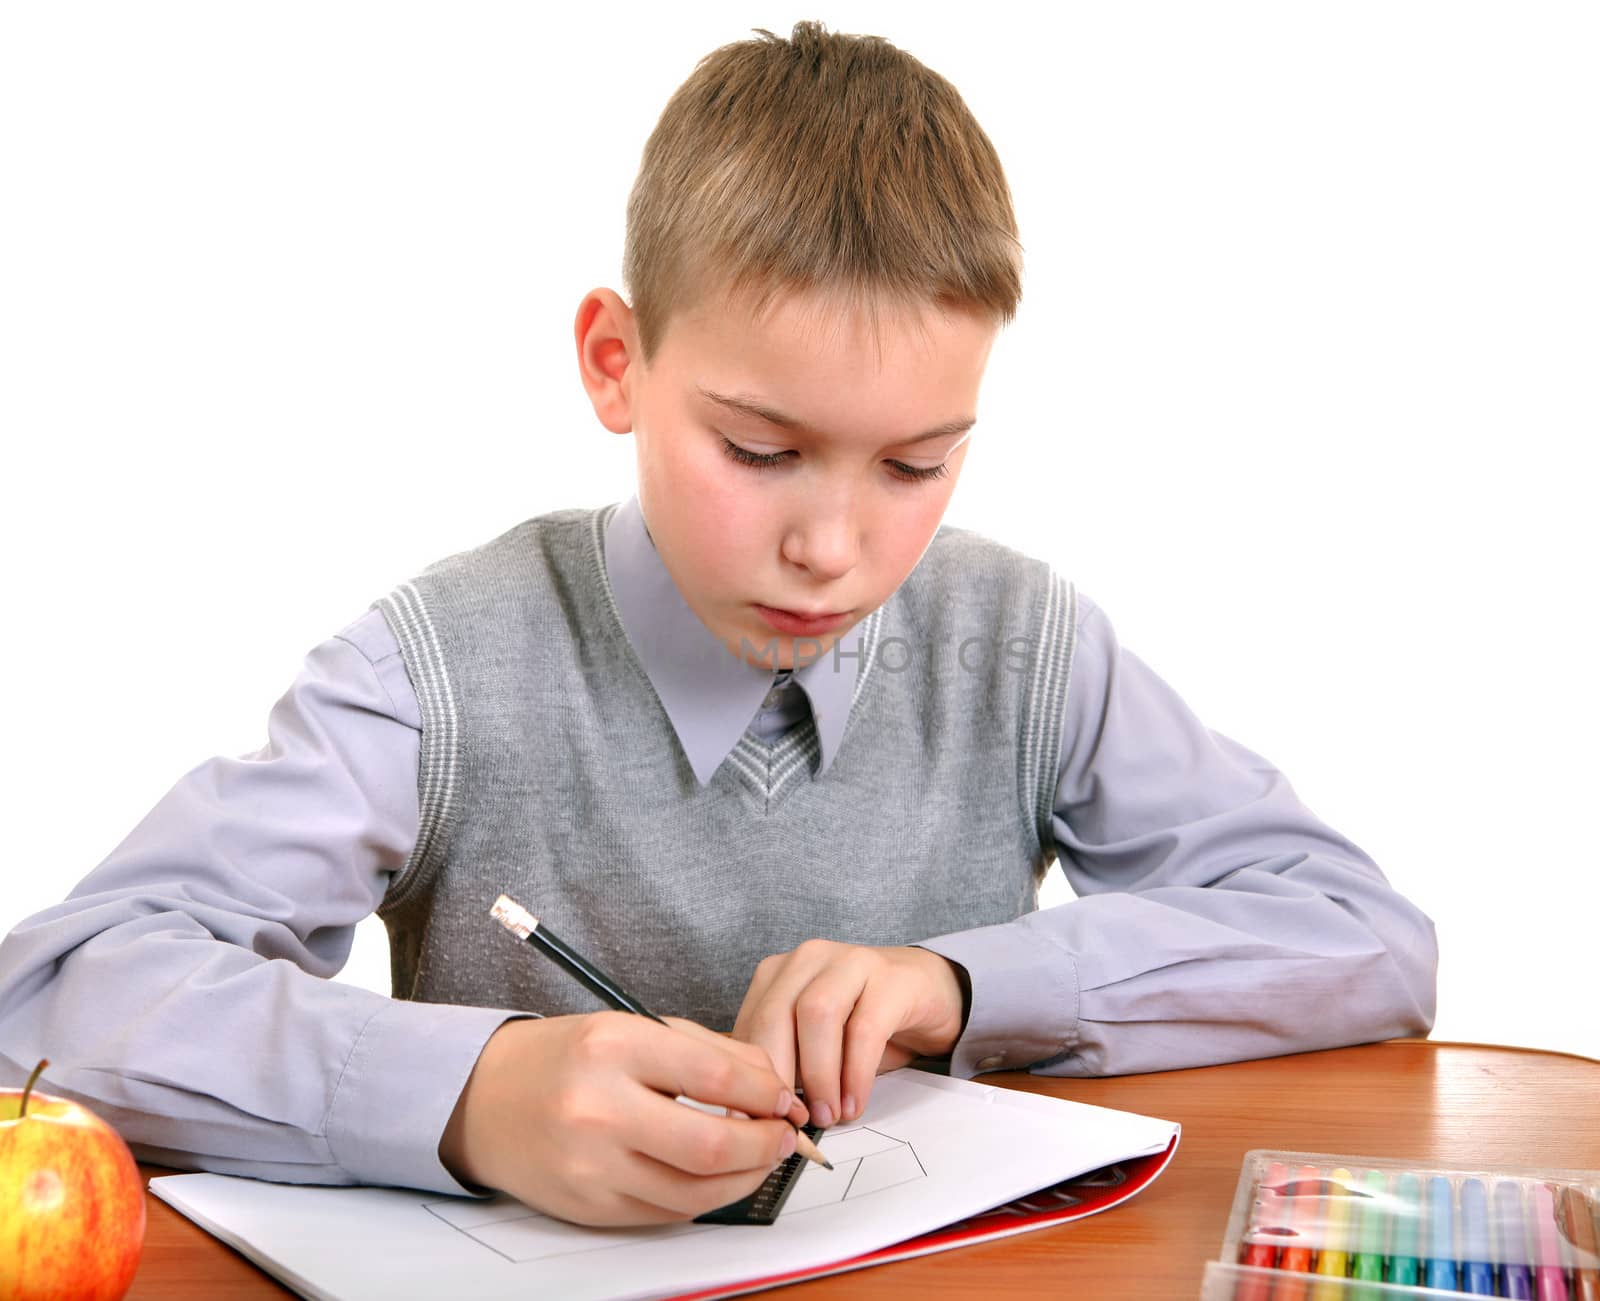 Kid Drawing at the School Desk Isolated on the White Background